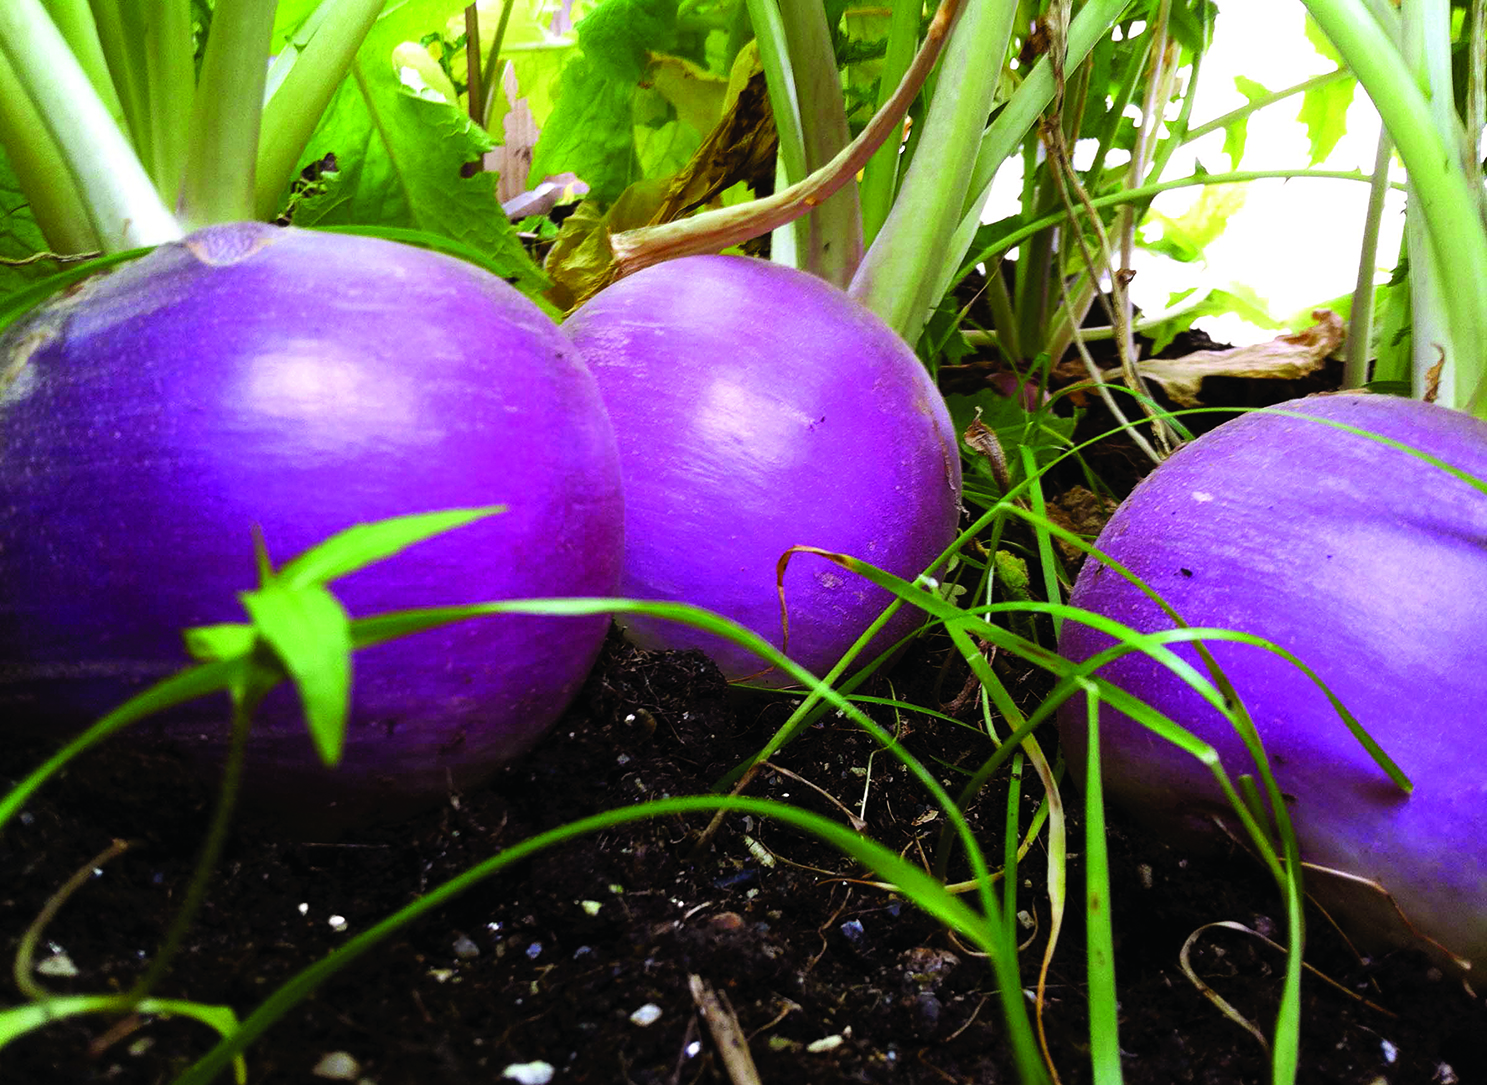 Turnips, a local favorite because the cold soil makes them grow sweet, are eaten with seal oil. (photo by Seth Kantner)